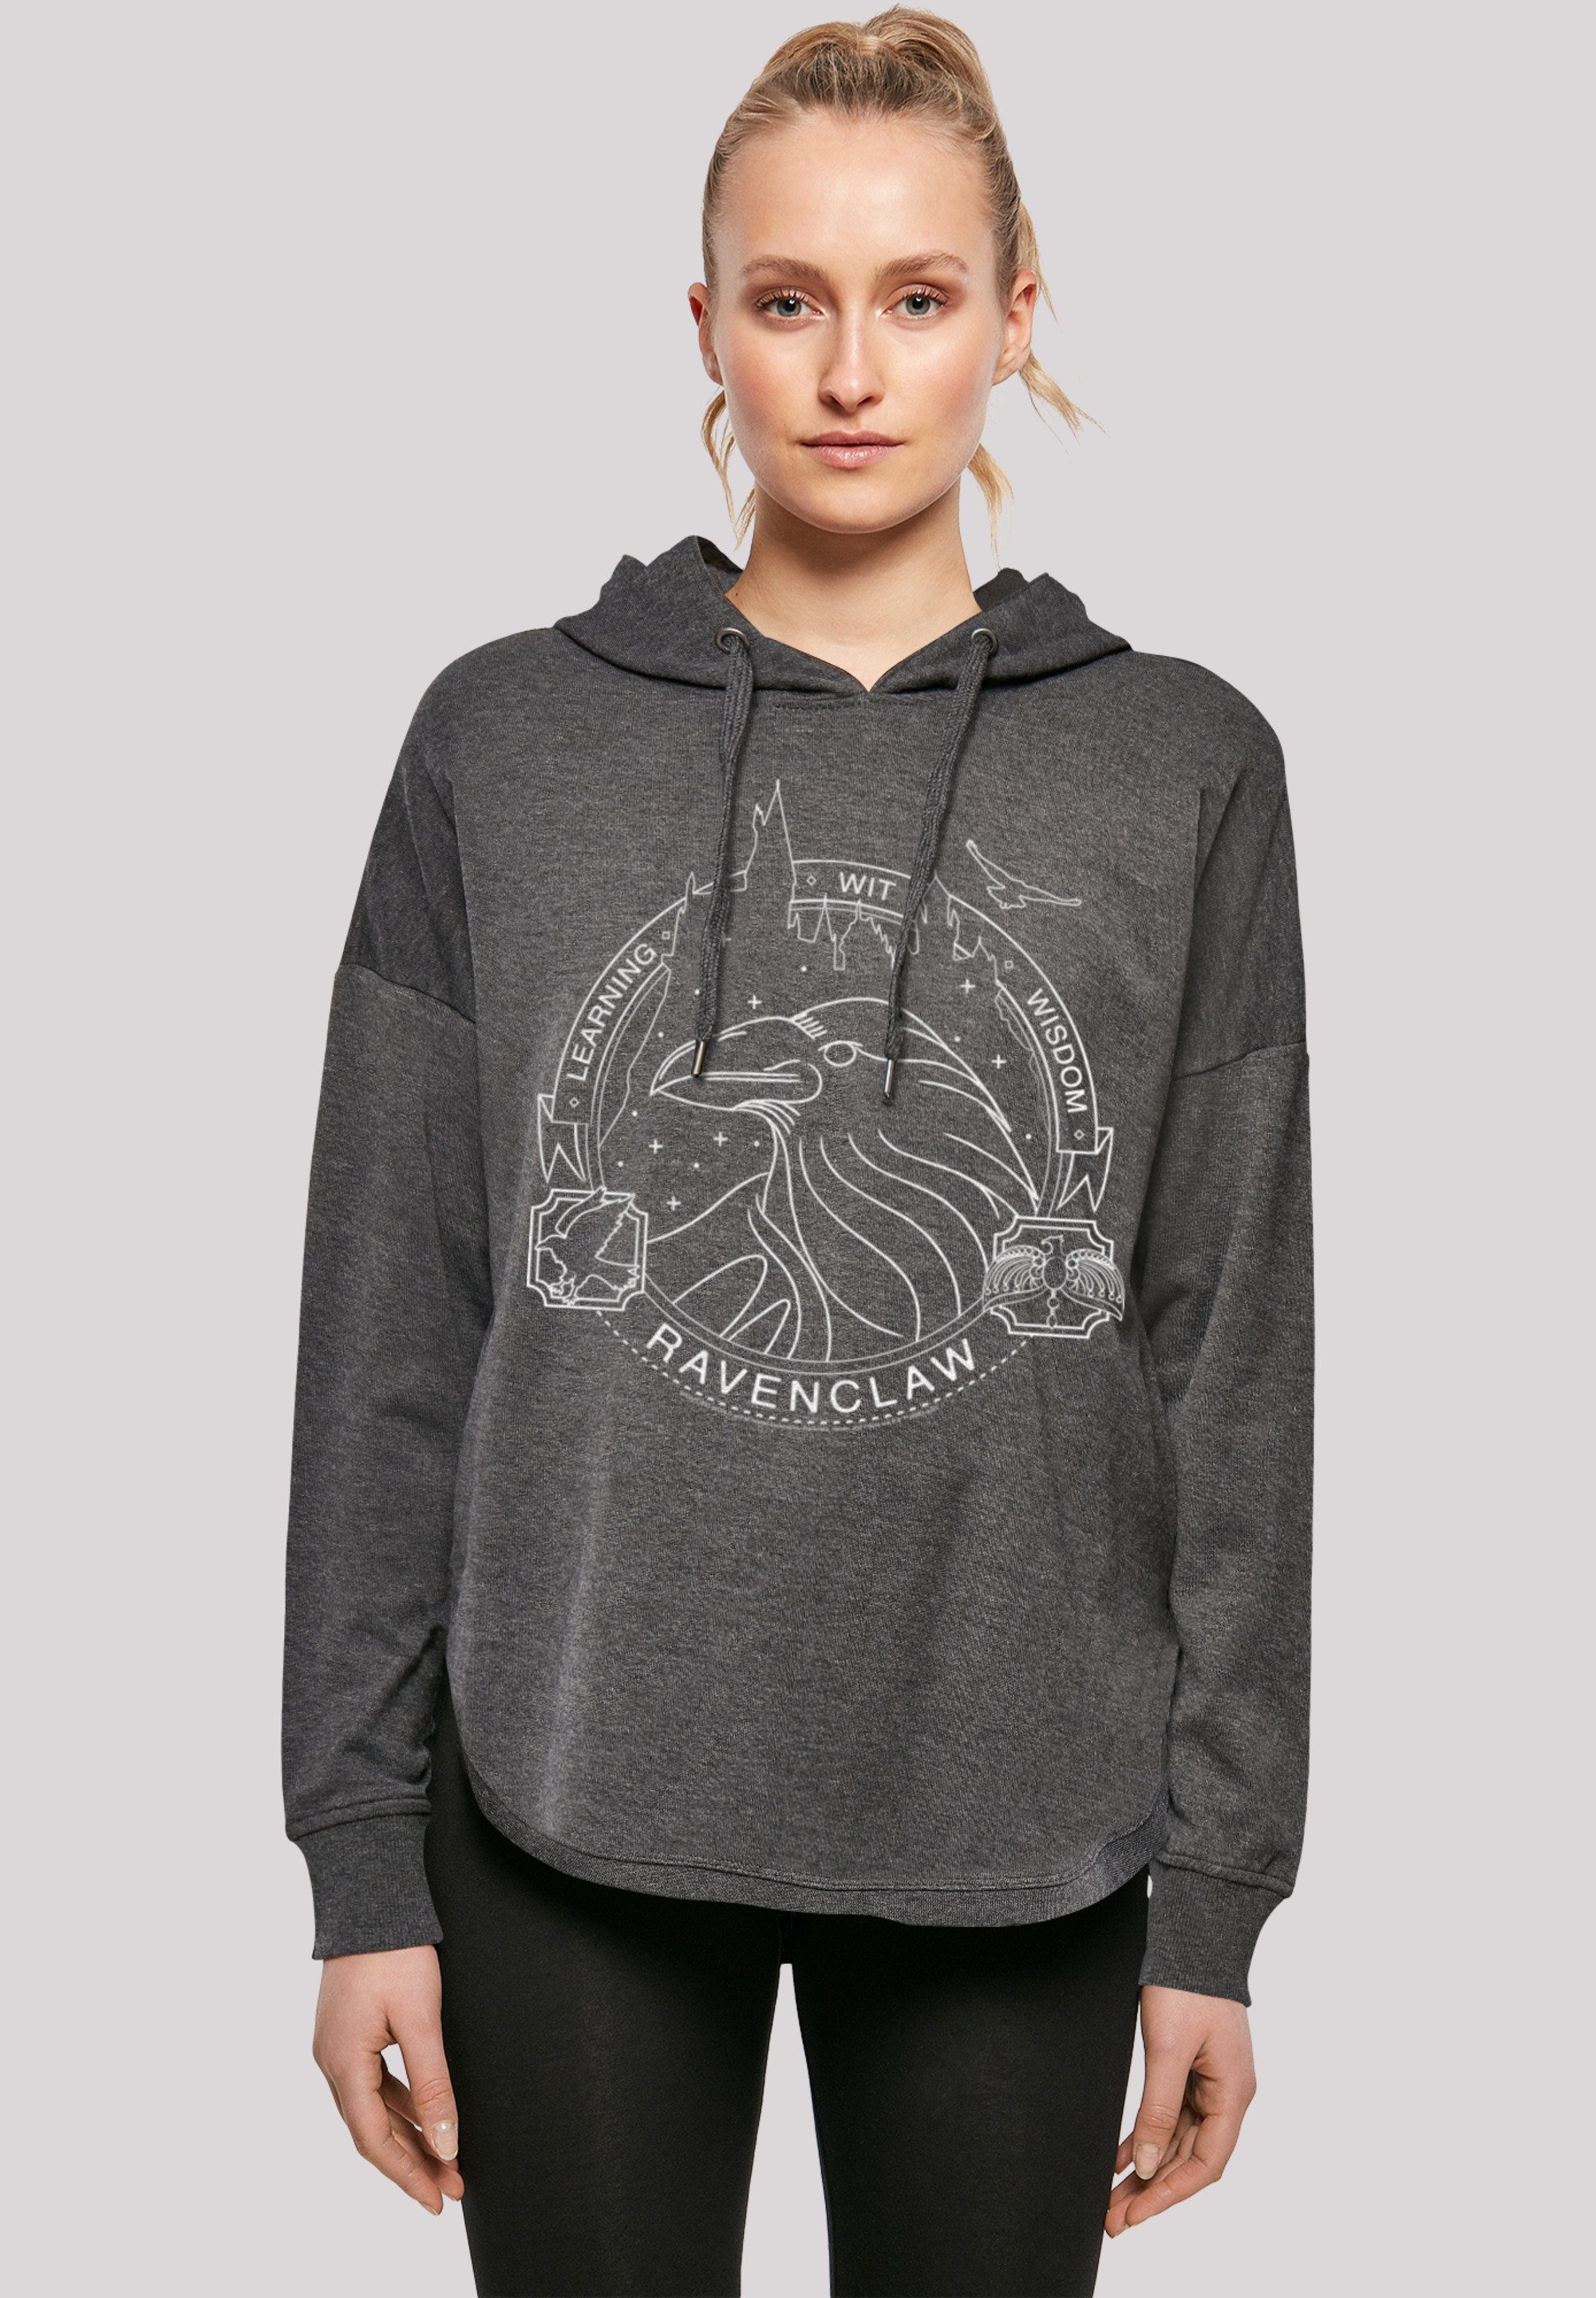 Hoody charcoal Potter Harry Kapuzenpullover Damen Ladies Oversized Seal F4NT4STIC Ravenclaw with (1-tlg)